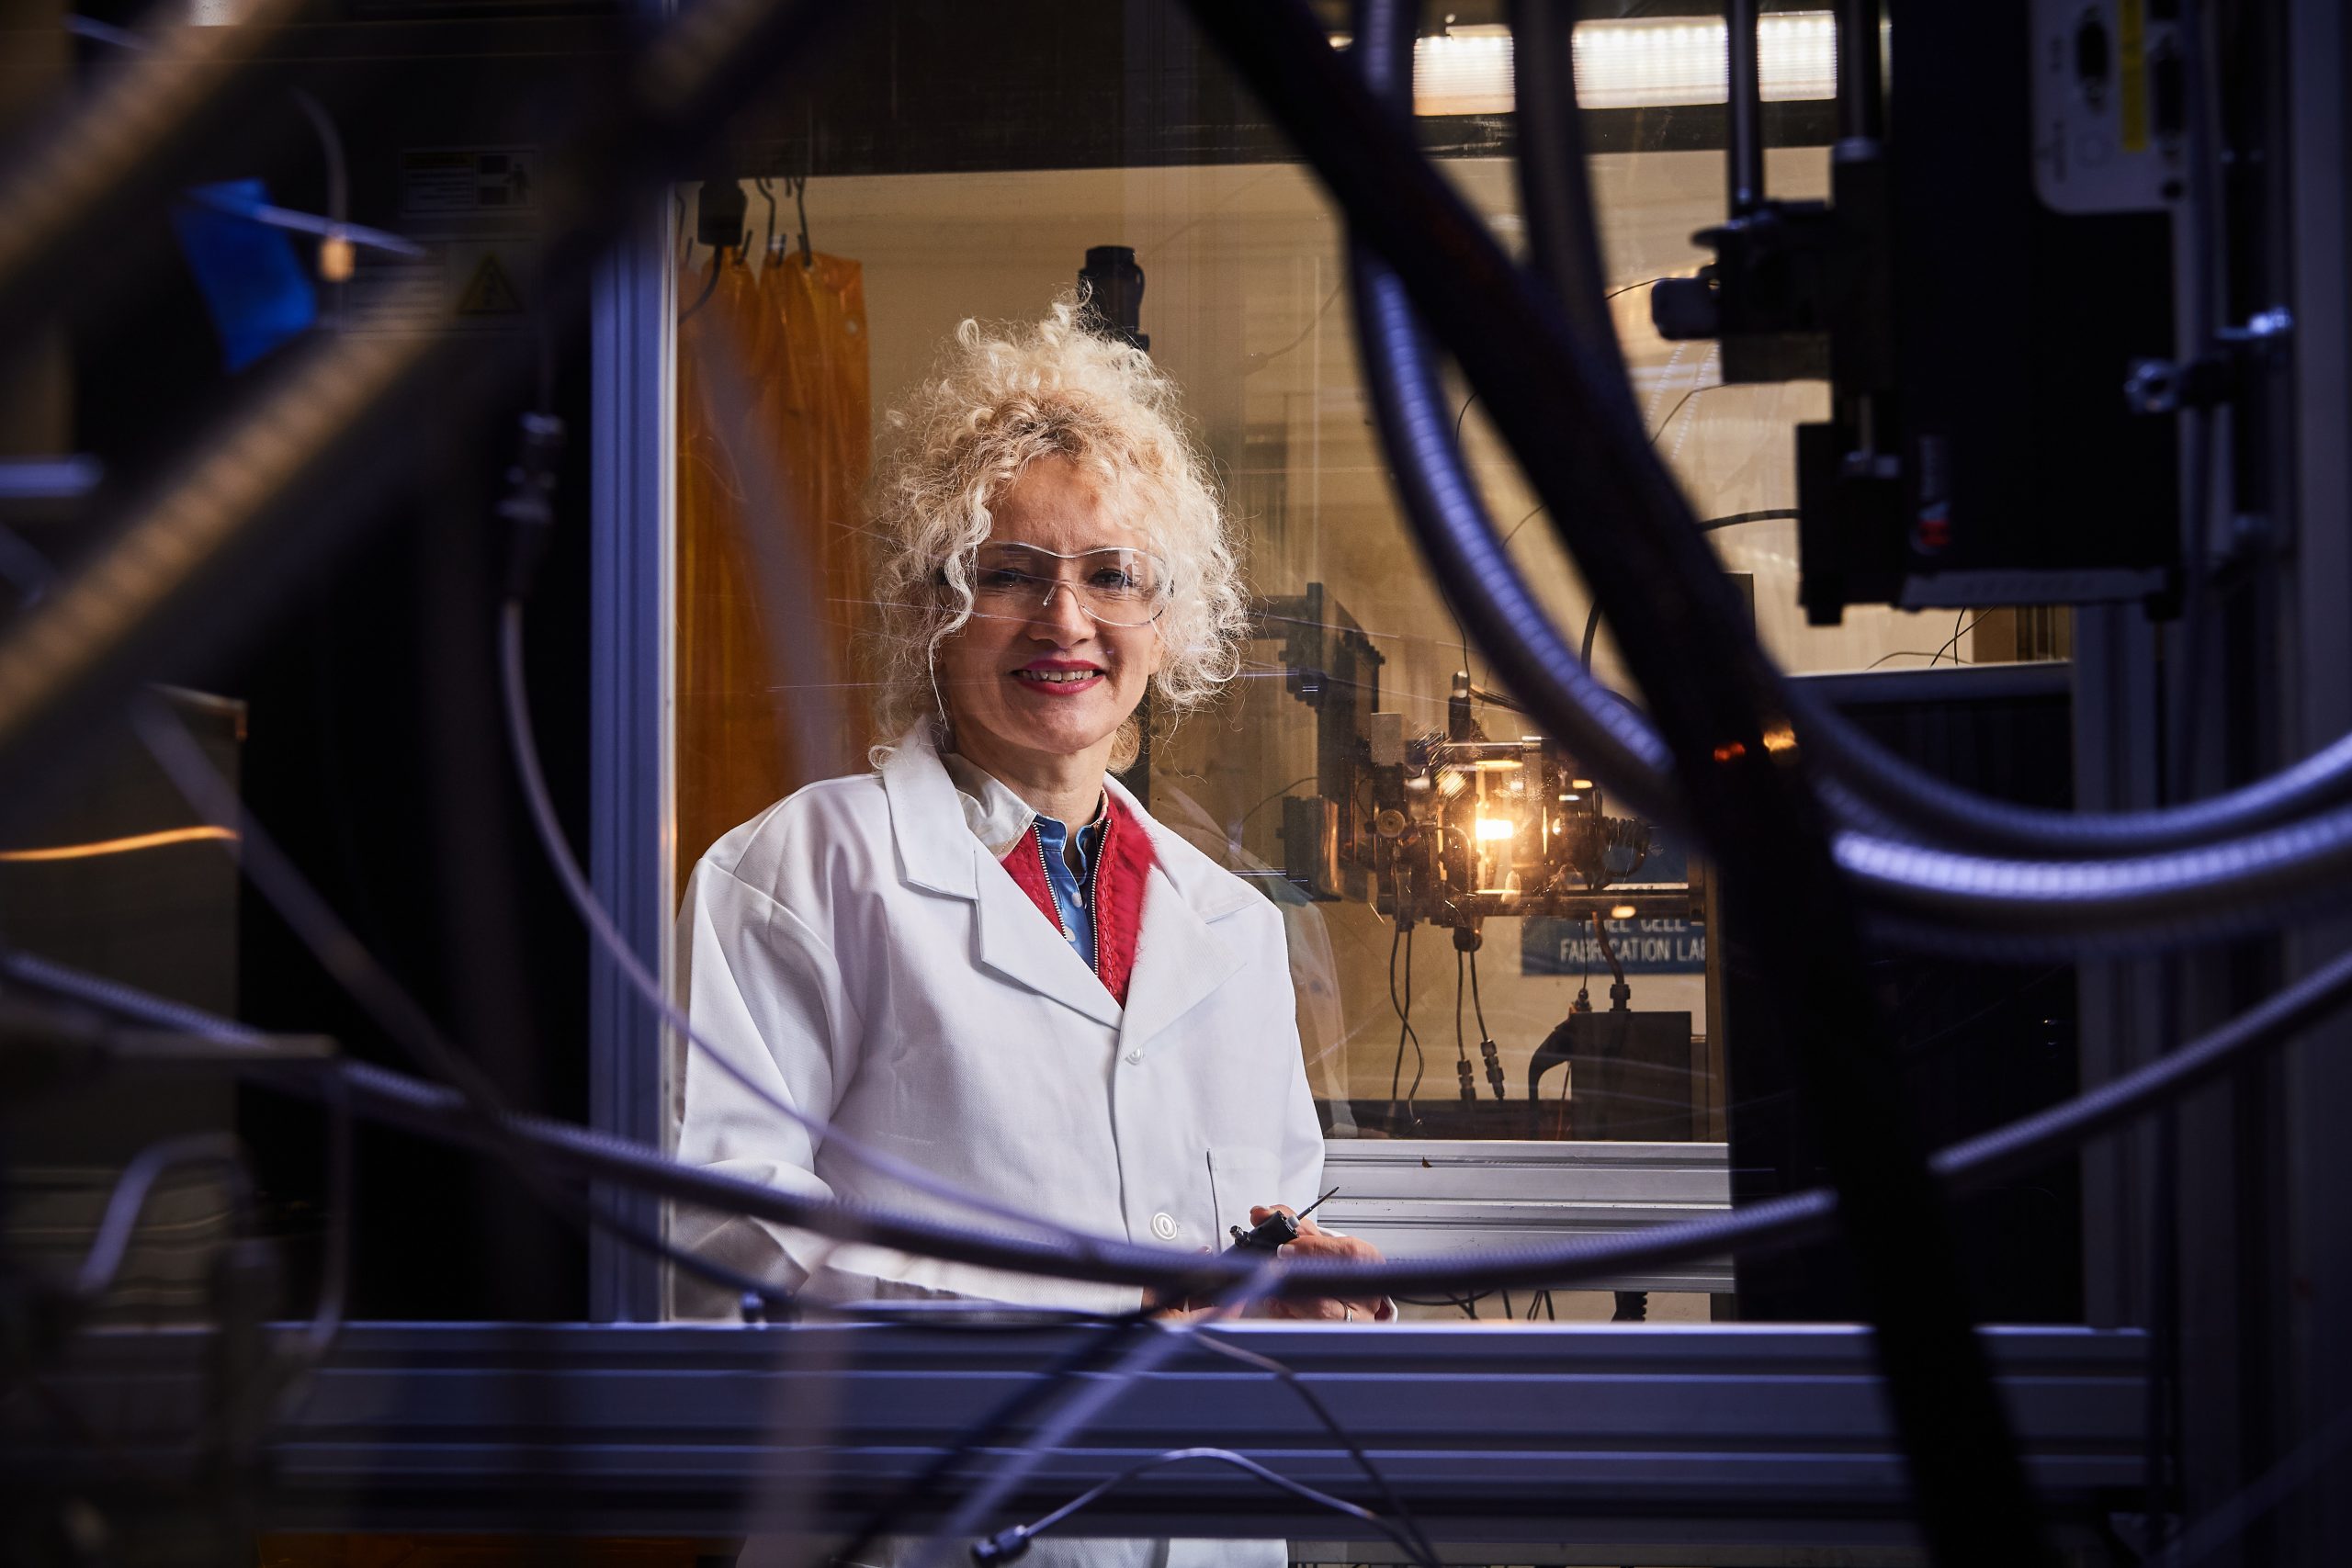 Radenka Maric, vice president for research, at her lab at the Center for Clean Energy Engineering (C2E2) on Nov. 22, 2019. (Peter Morenus/UConn Photo)